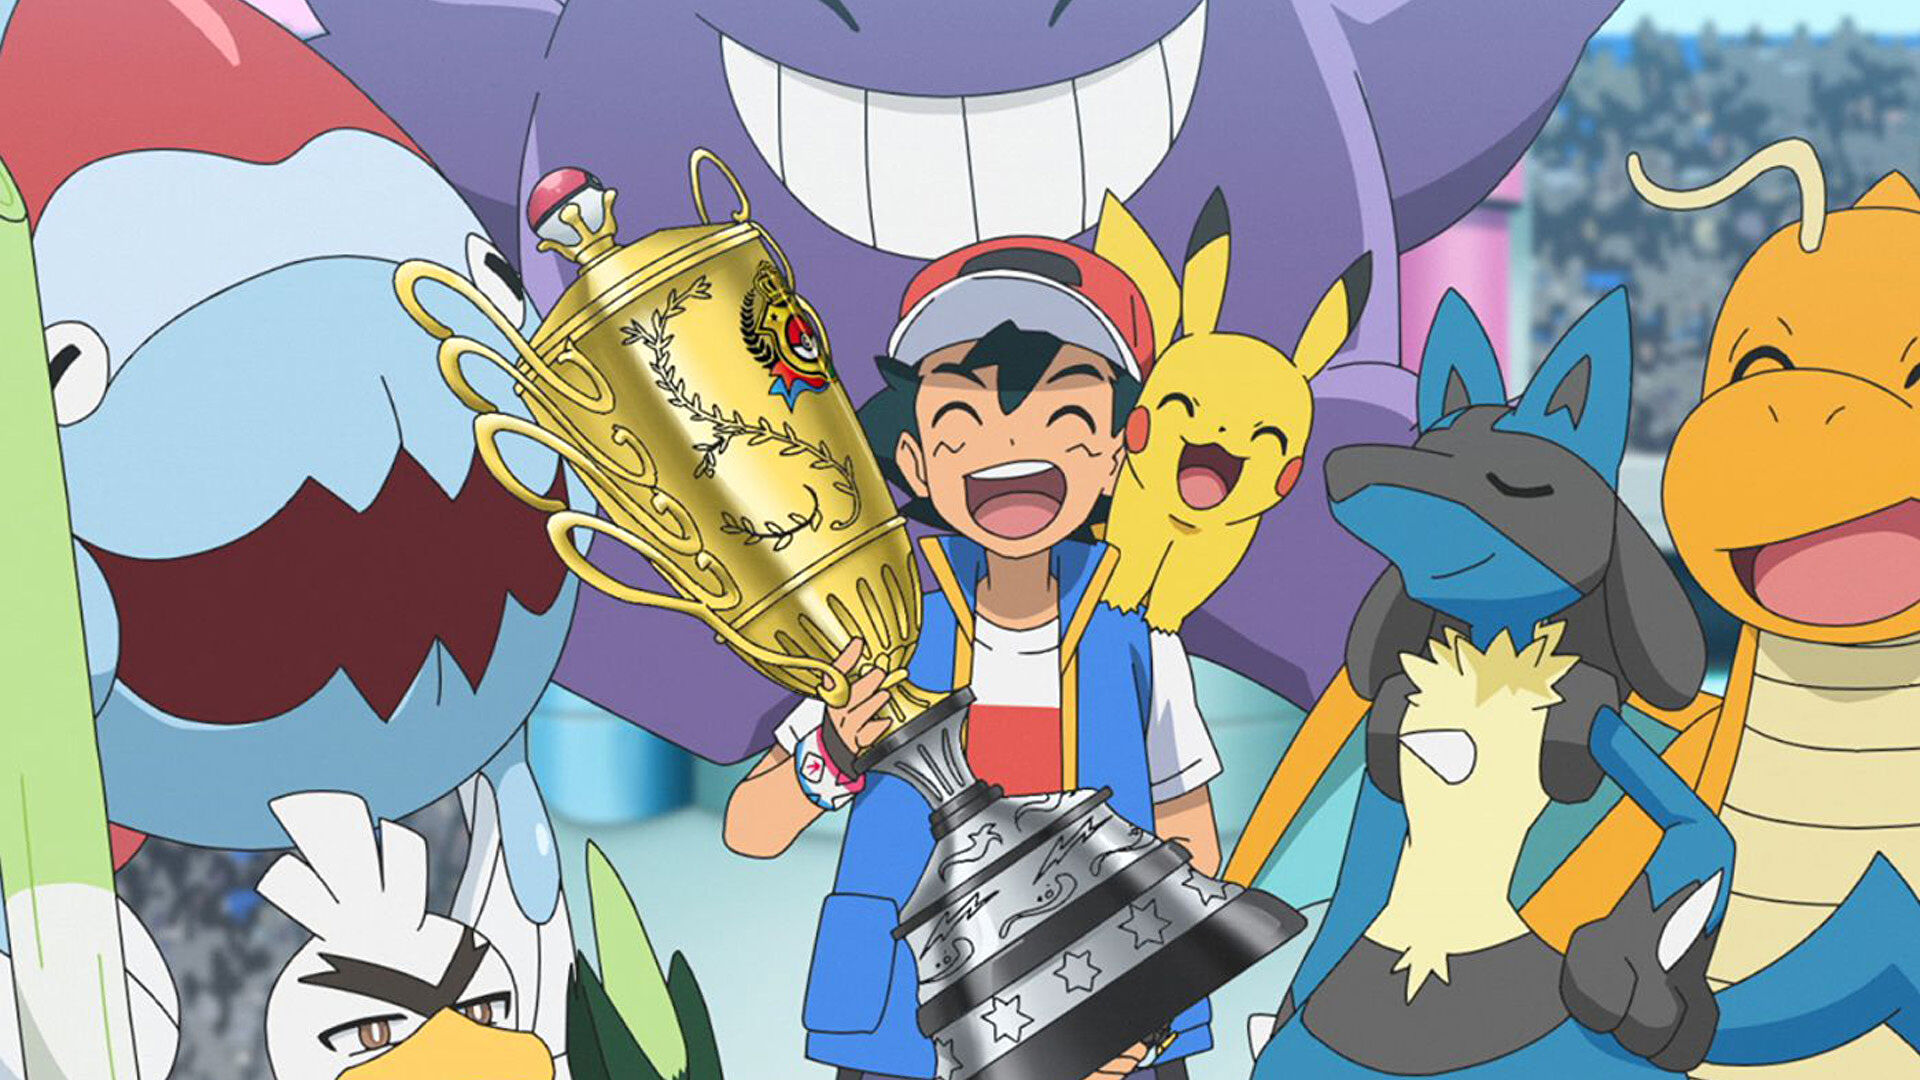 Ash Ketchum is officially the world’s best Pokémon trainer, bless him